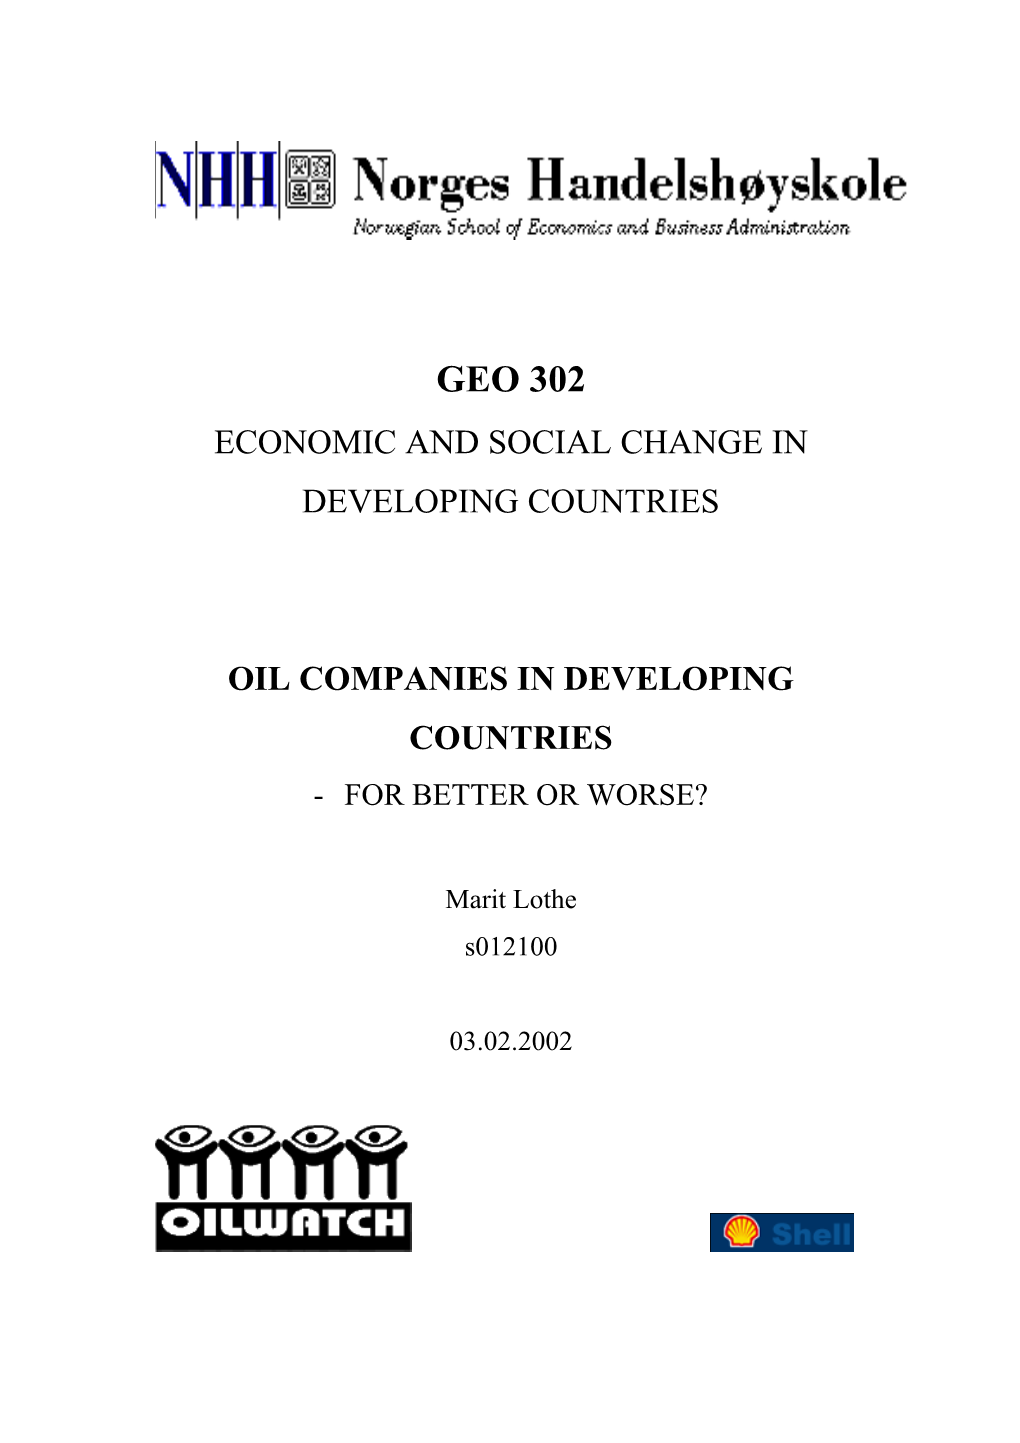 Economic and Social Change in Developing Countries